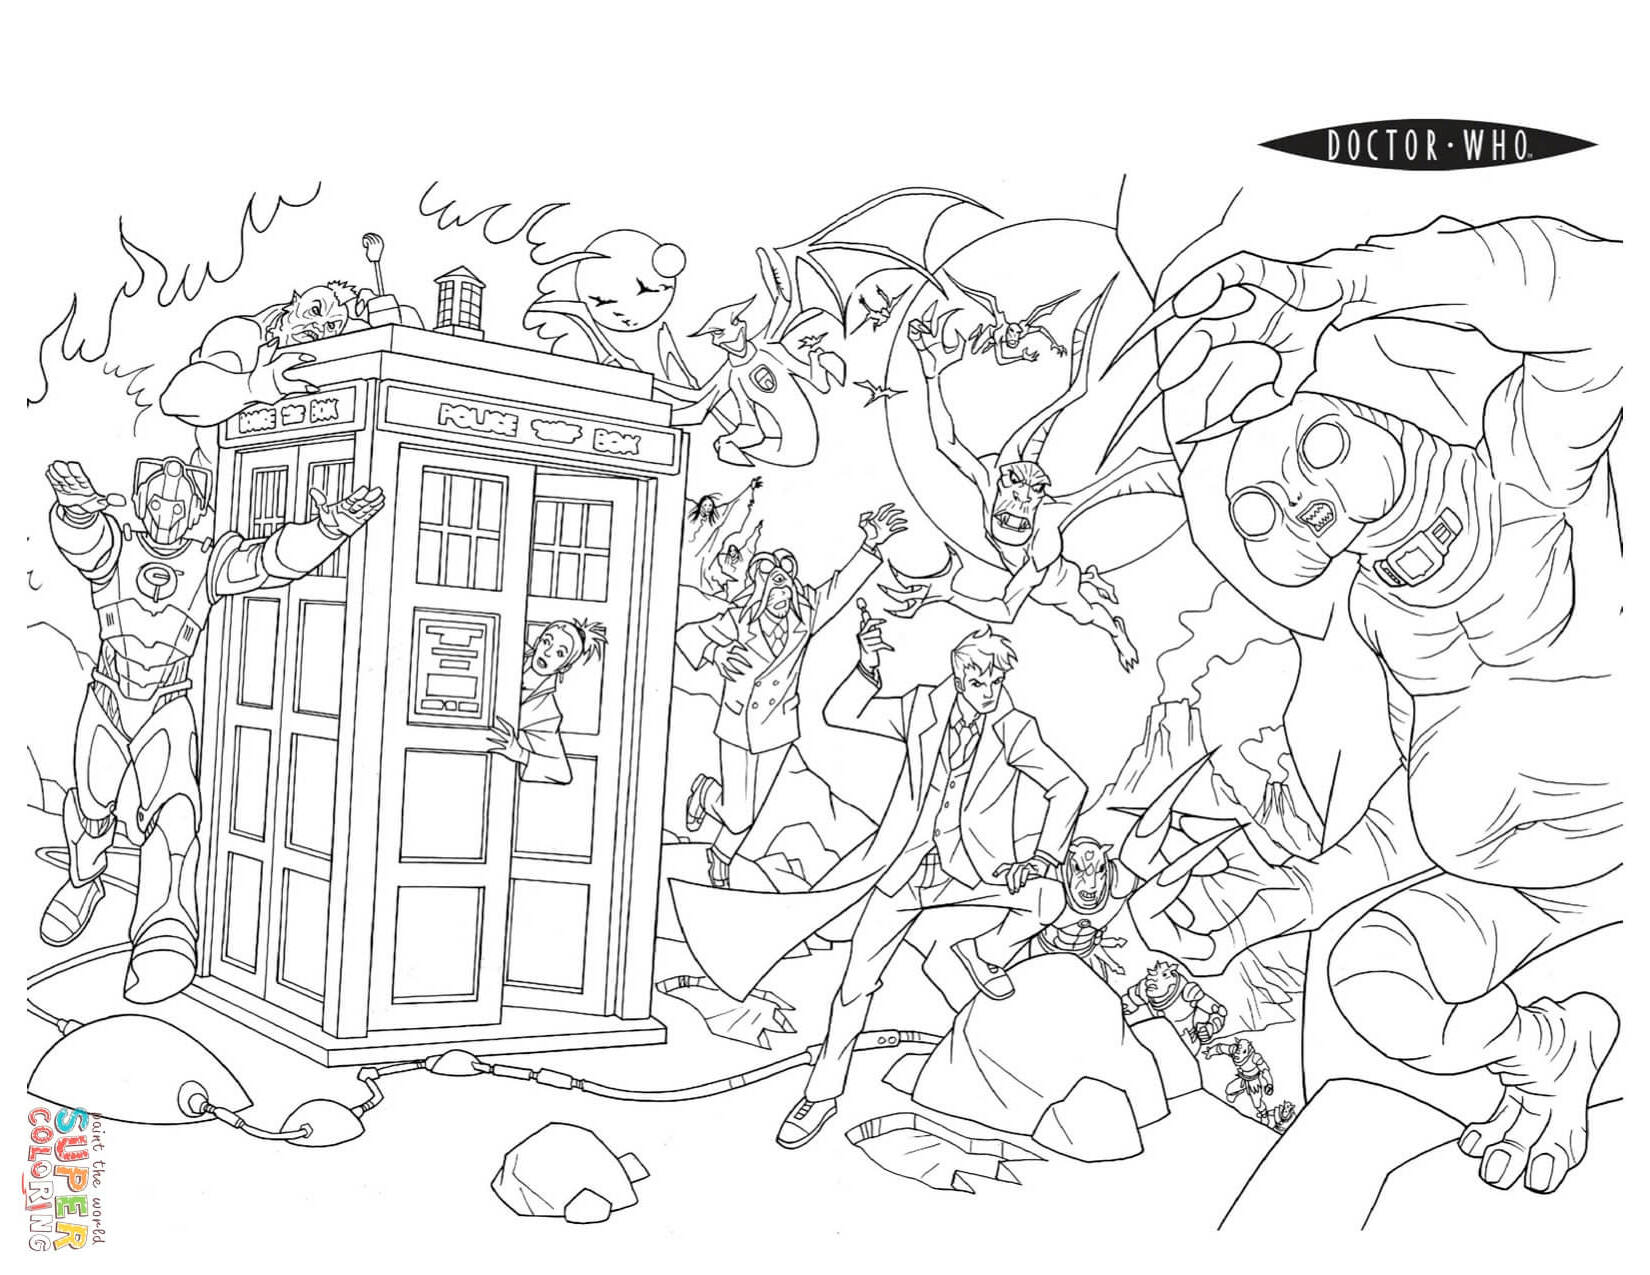 The Twelfth Doctor from Doctor Who coloring page | Free Printable ...